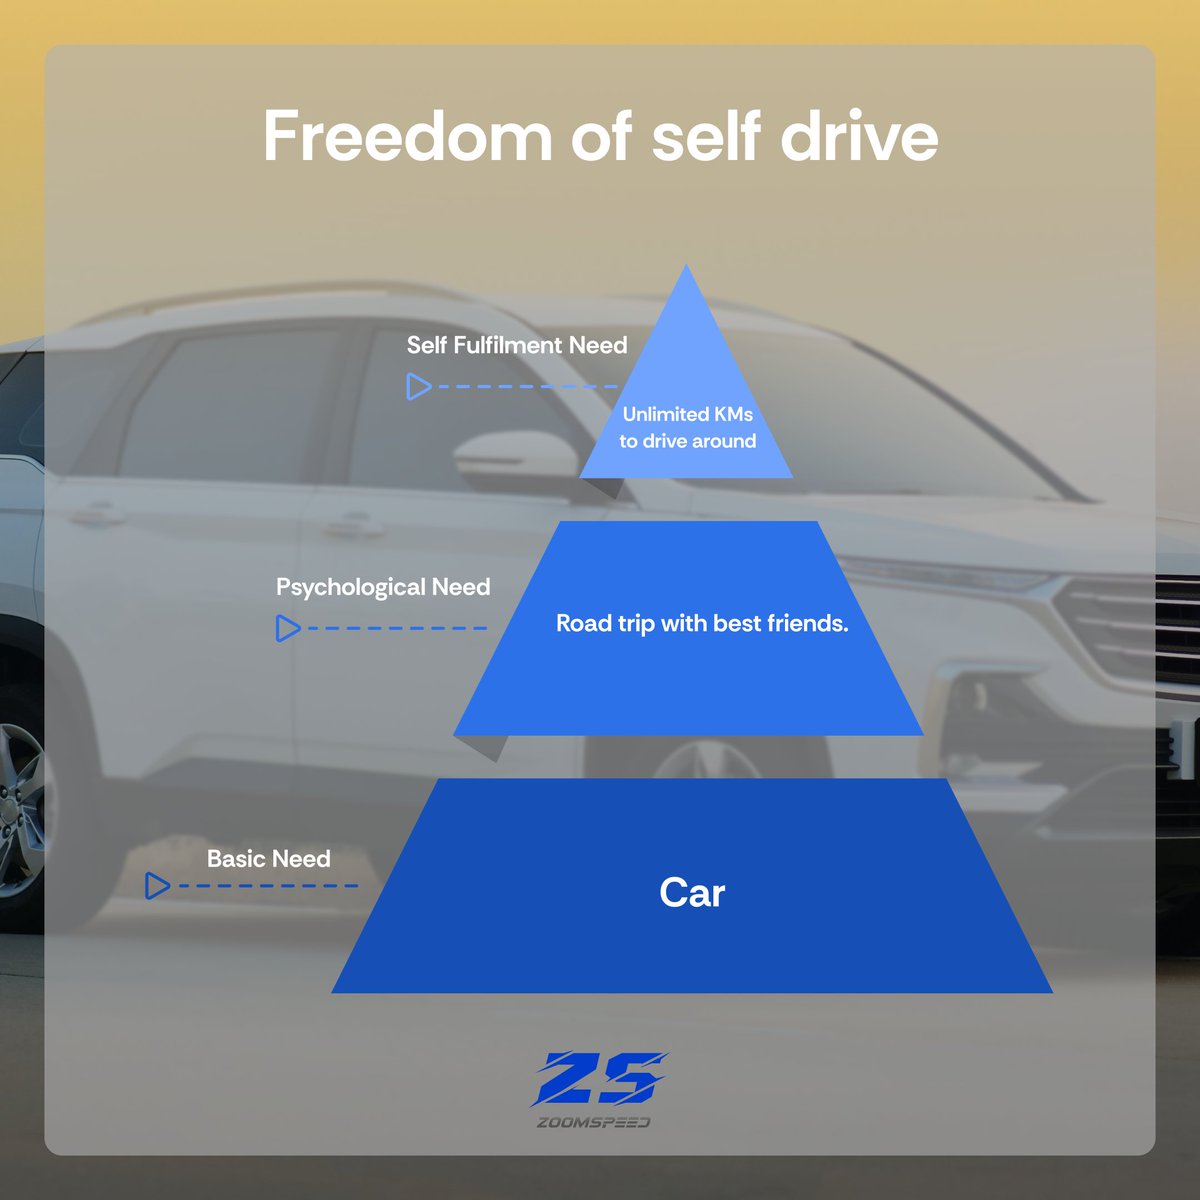 Experience the ultimate travel bliss with ZoomSpeed! Choose from a diverse range of cars and enjoy the freedom of self-drive. Our features cater to your every travel need, book your car today! 
#SelfDrivingCars #Zoomspeed